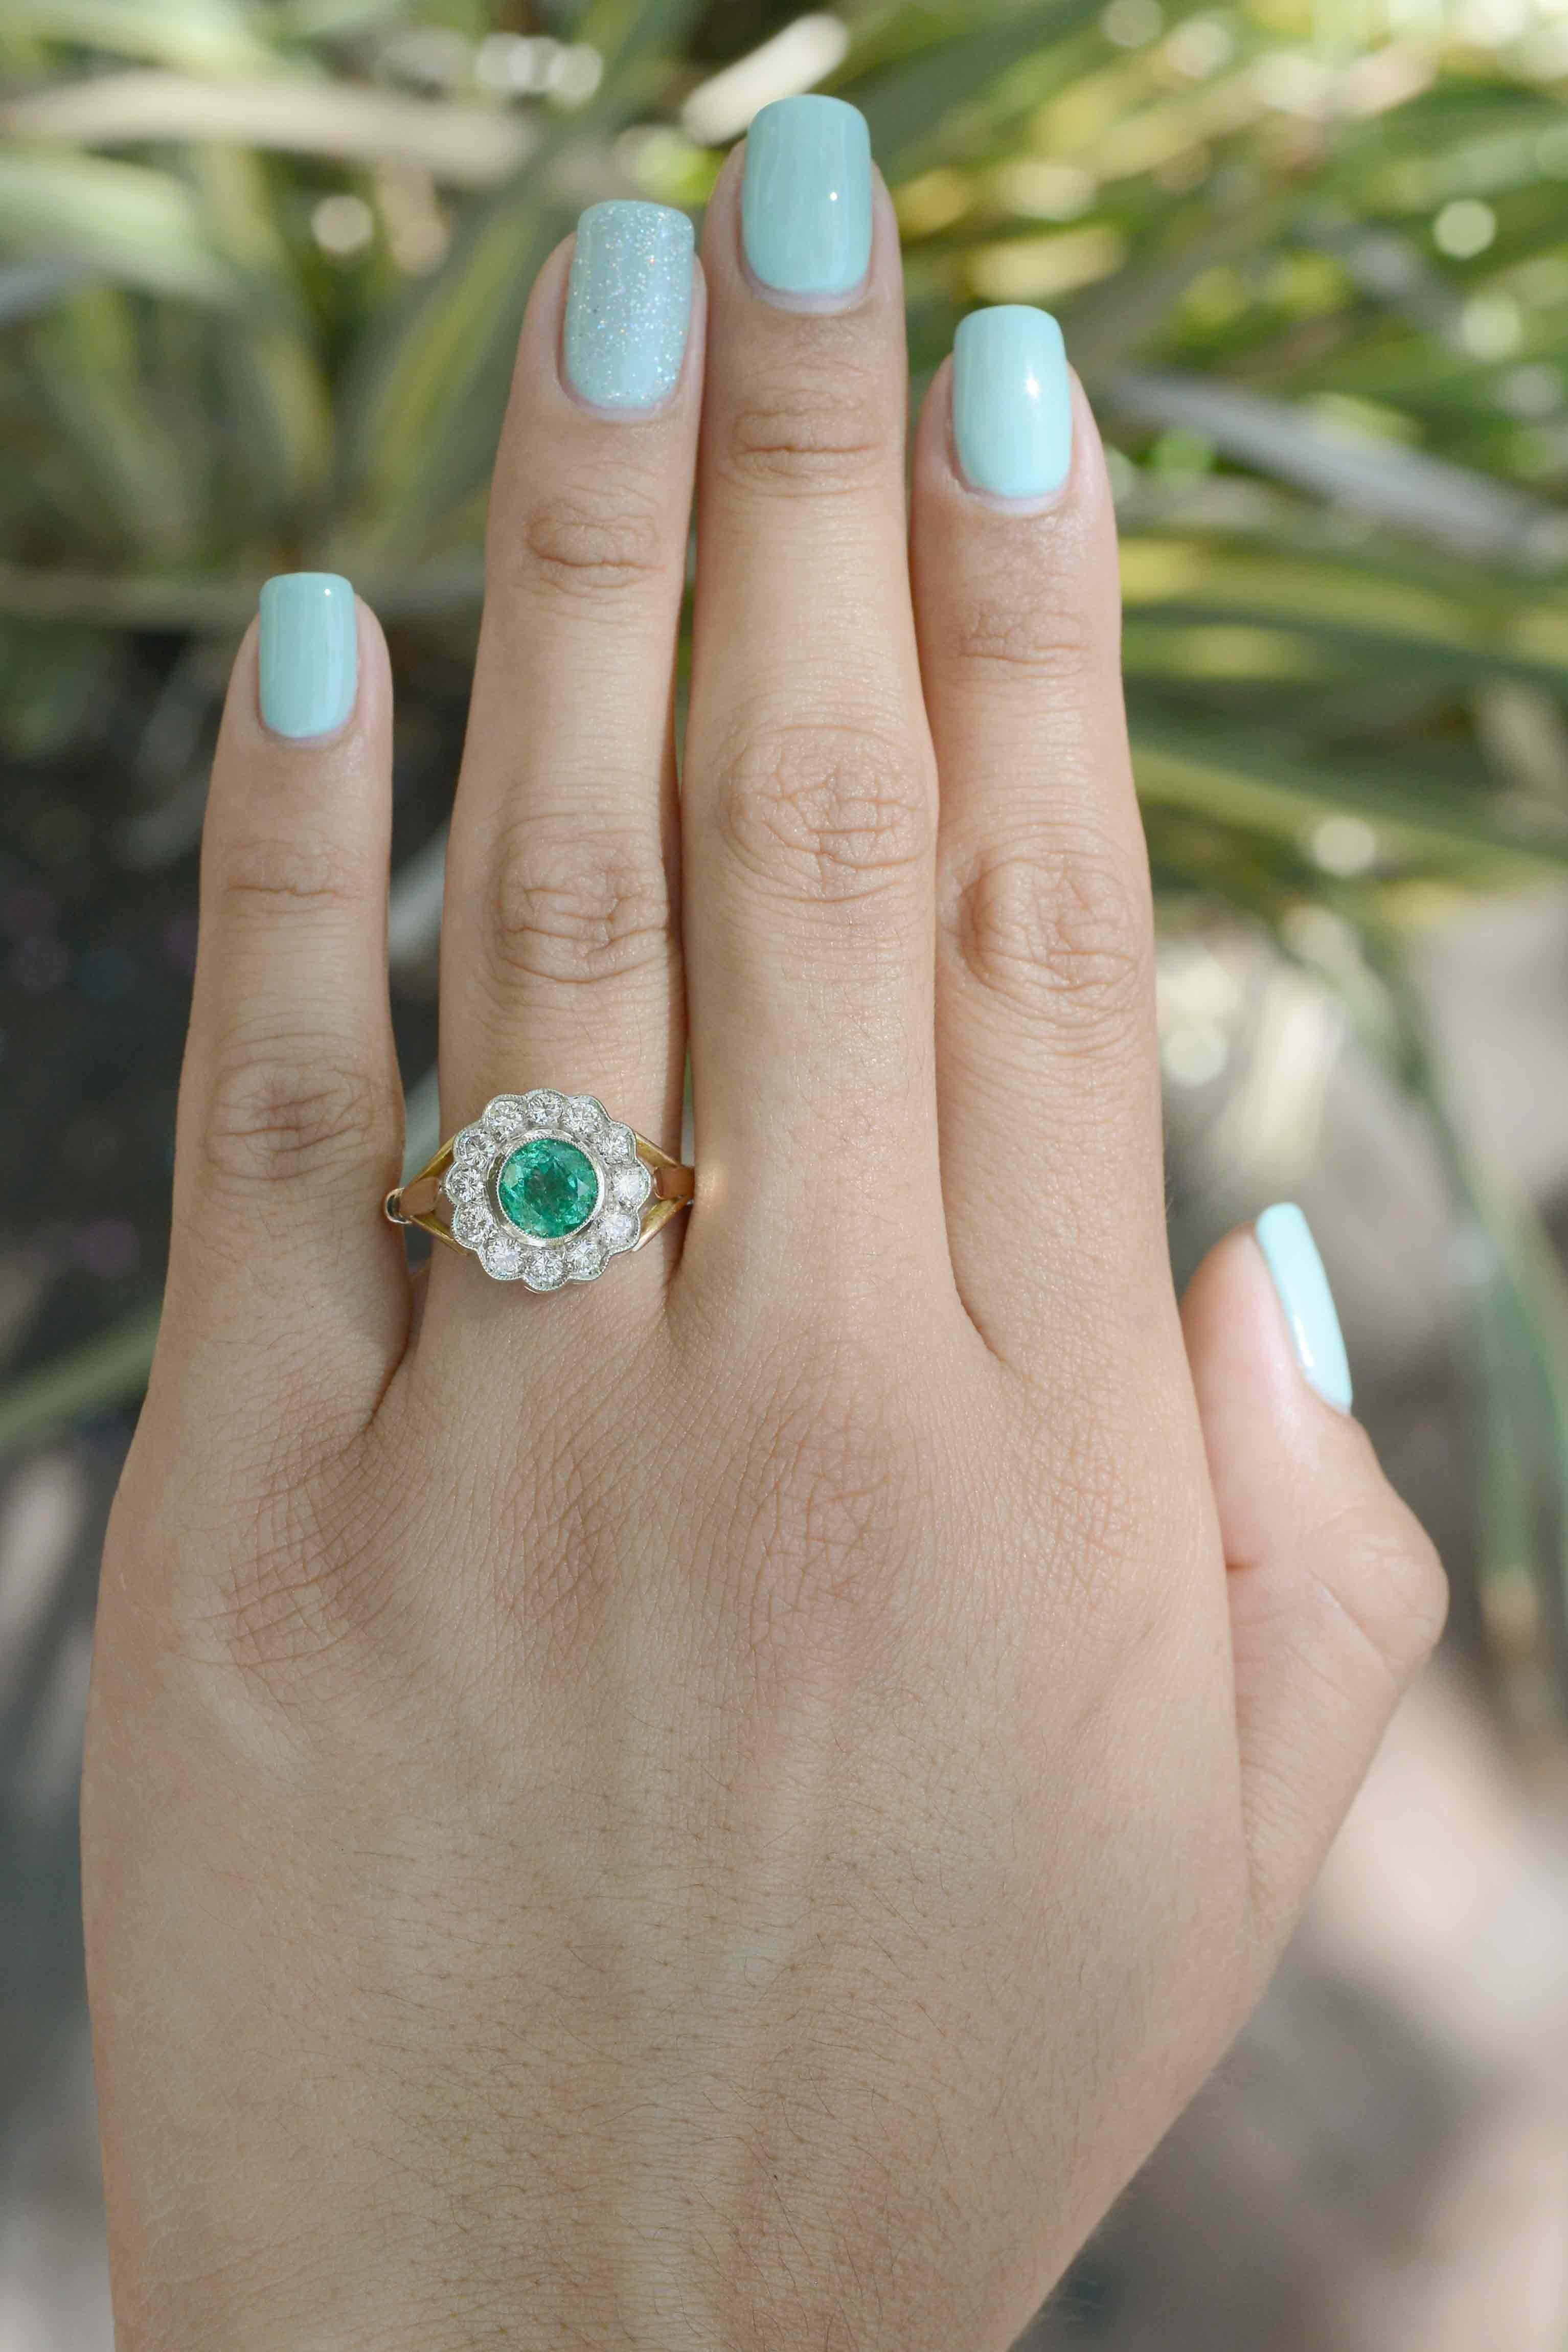 This antique emerald and diamond floral cluster engagement ring is unarguably a gorgeous, wearable piece. The enchanting emerald illuminates out of its bezel setting and is encased in a diamond floral arrangement. The setting harmonizes the soft,